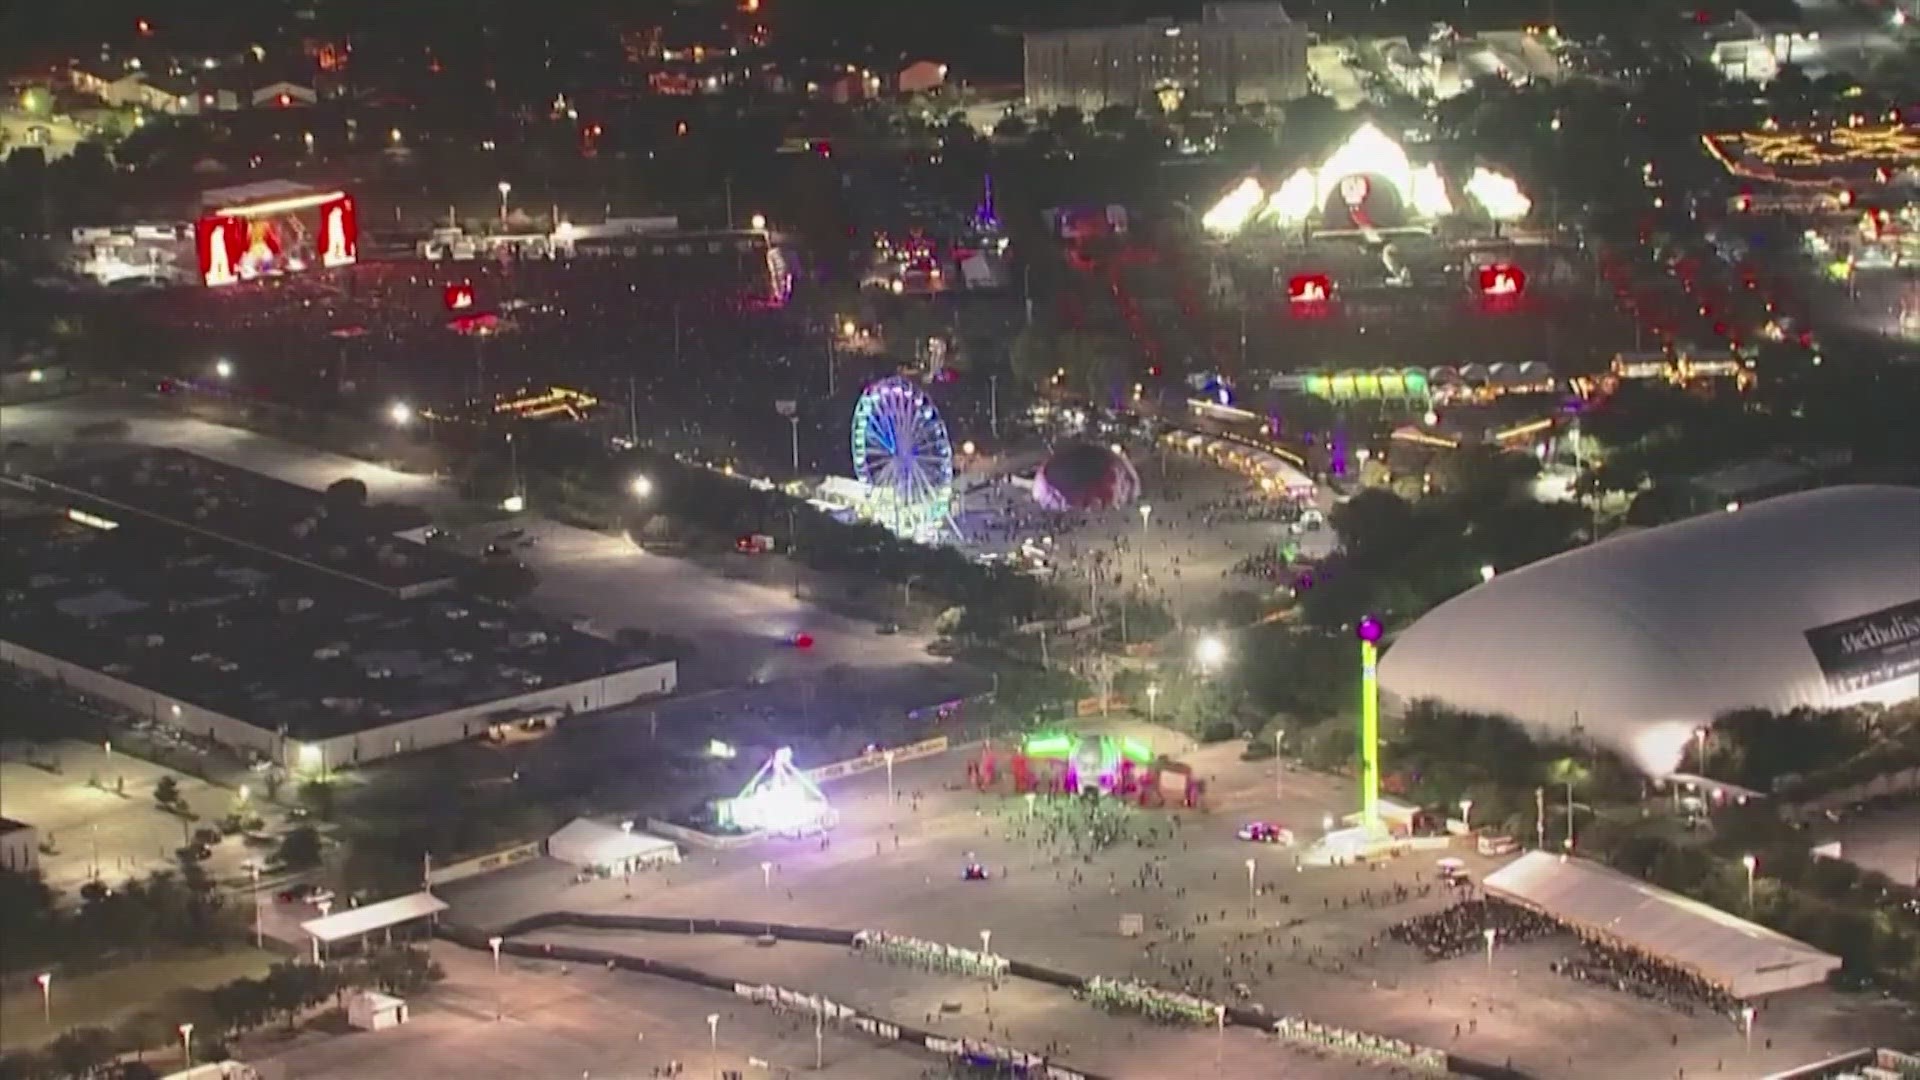 Ten people, including a 9-year-old boy, died at or after the Astroworld Festival in 2021.